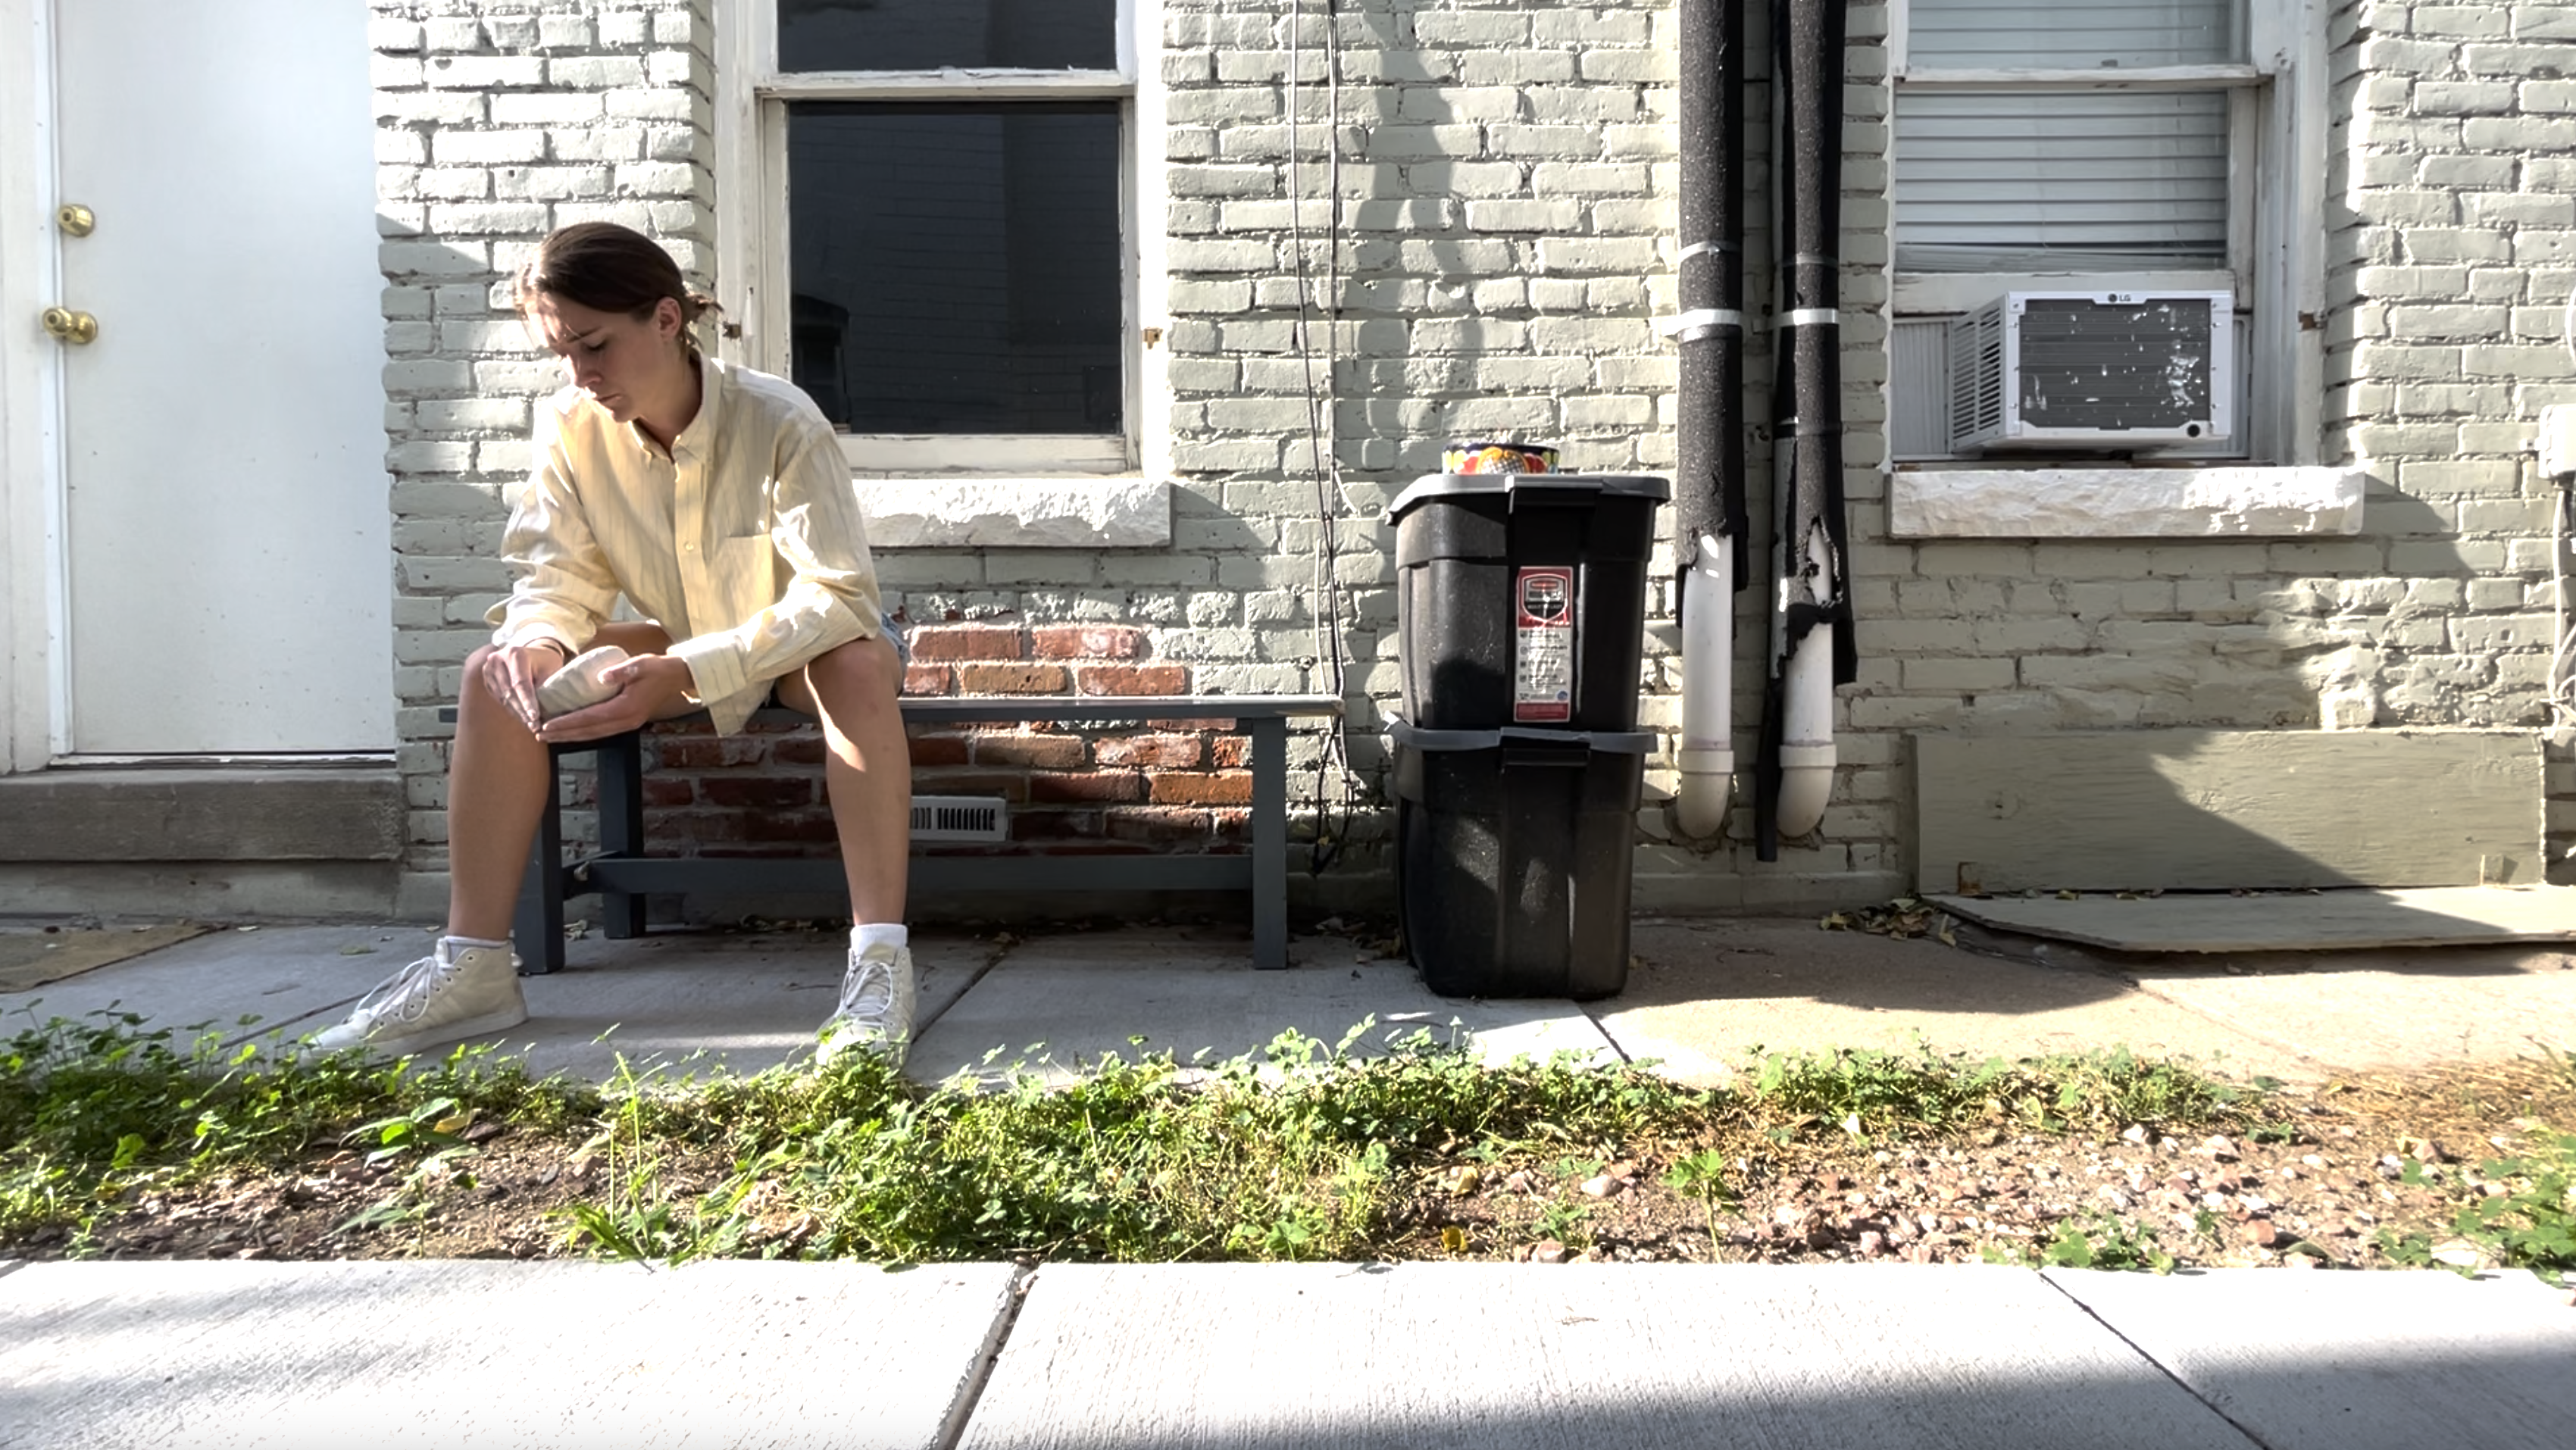 Sarah sits opn a bench outside of a white brick building making a pinch pot.